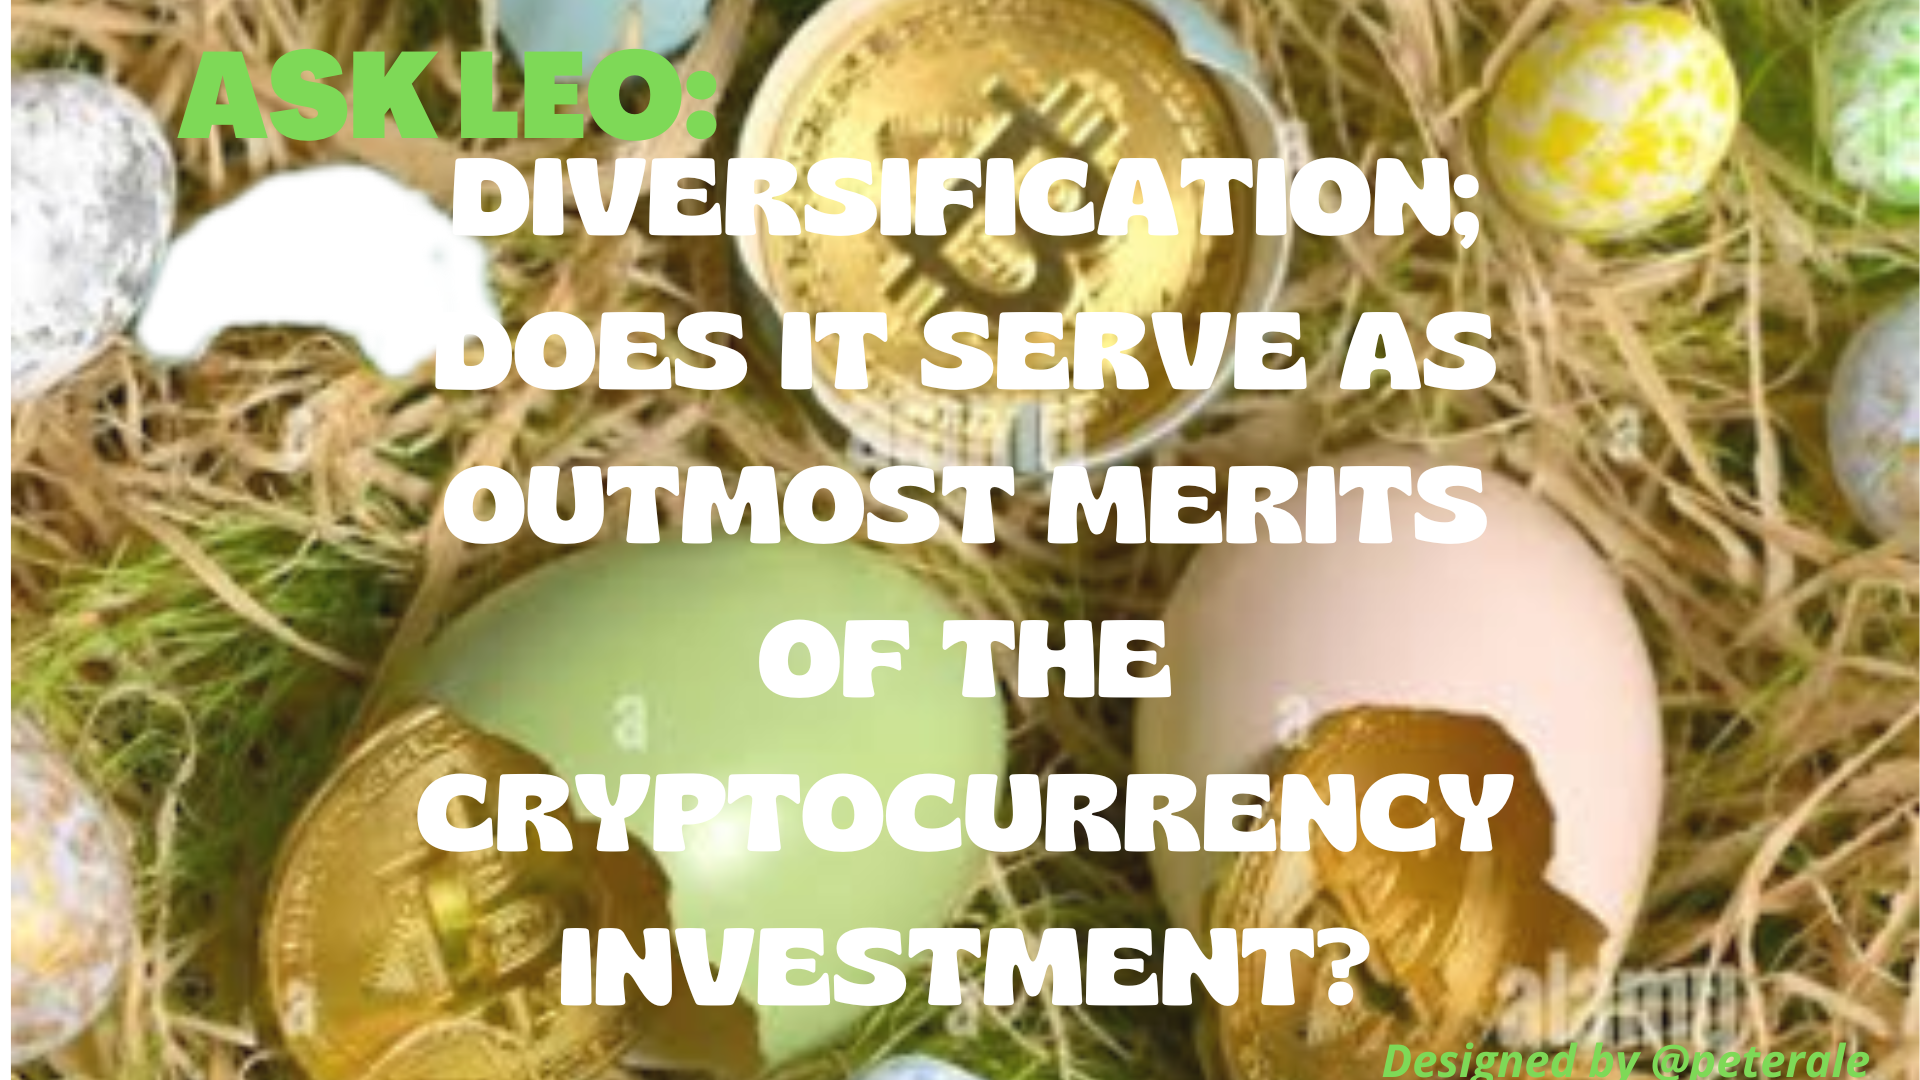 @peterale/ask-leo-diversification-does-it-serve-as-outmost-merits-of-the-cryptocurrency-investment